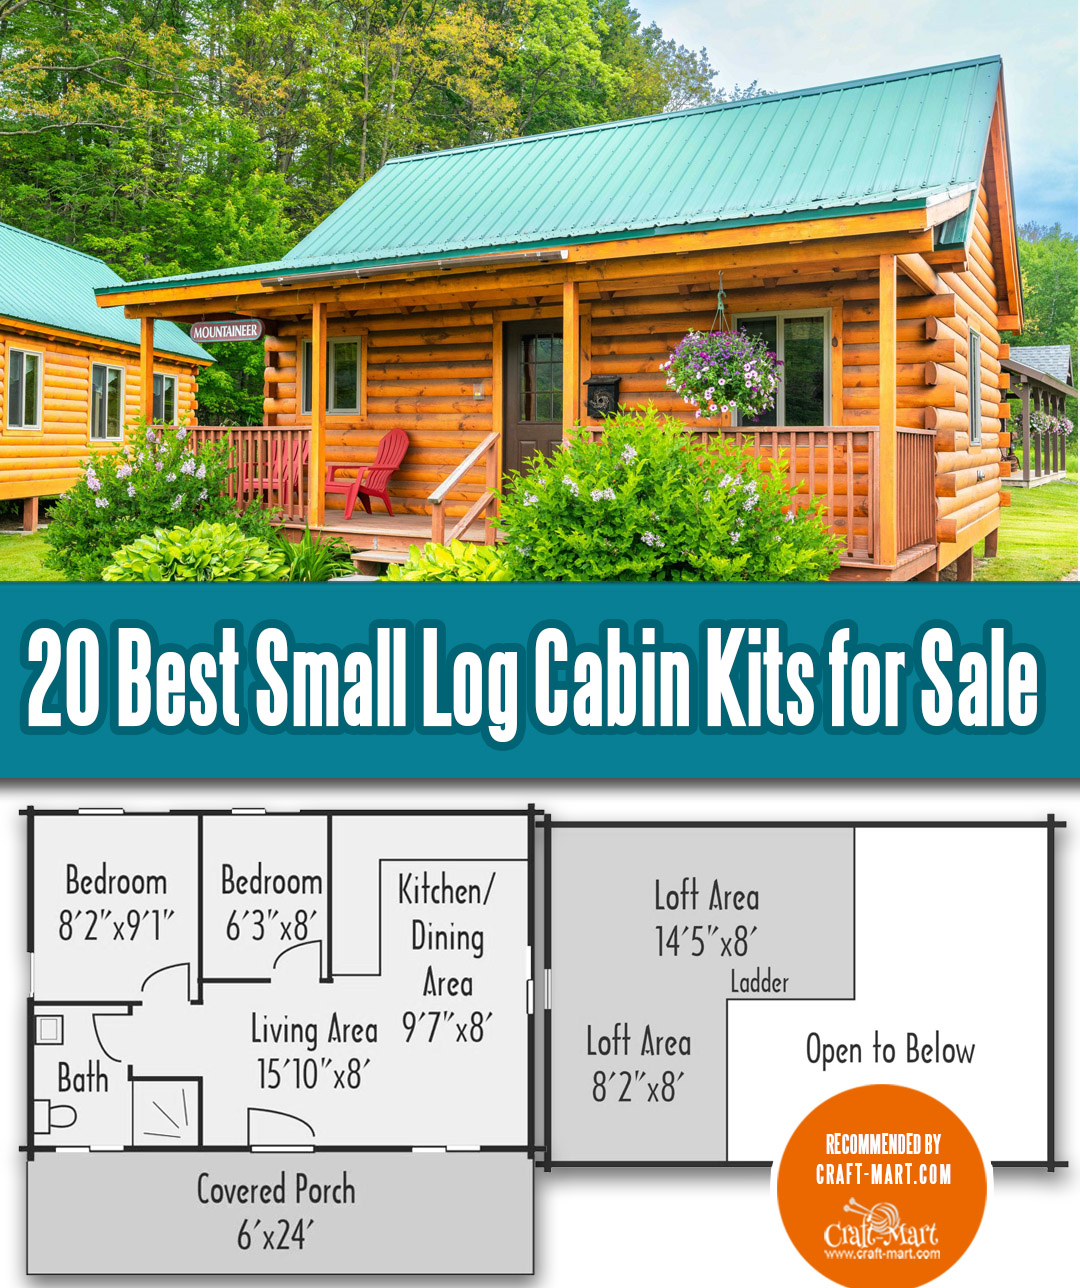 20 Best Small Log Cabin Kits for Sale